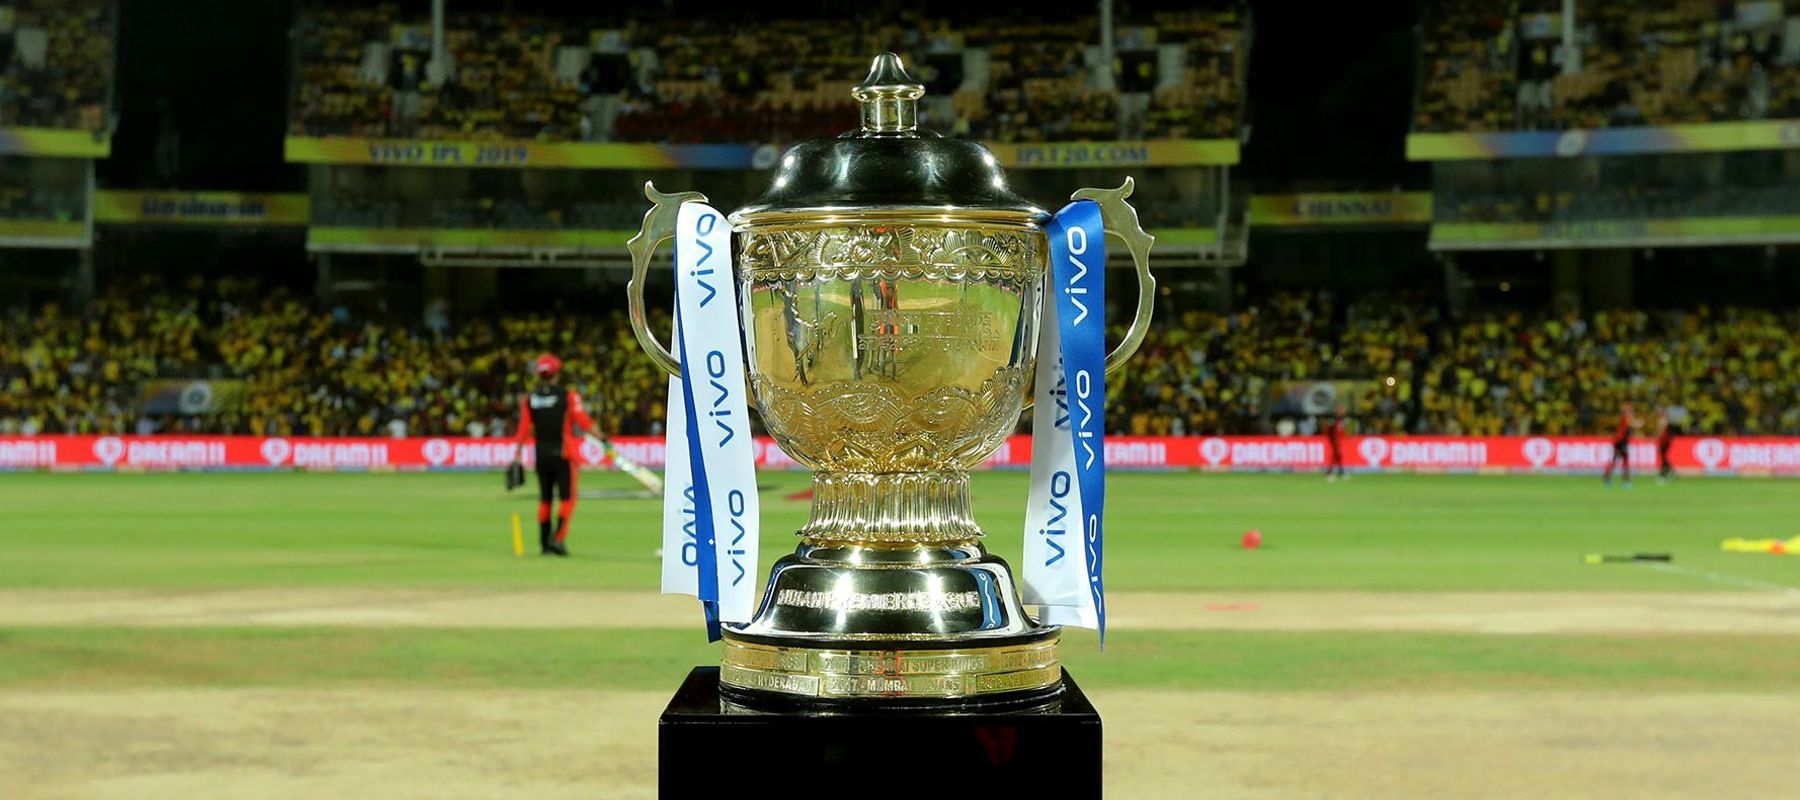 The IPL 2021 was postponed till further notice on May 4